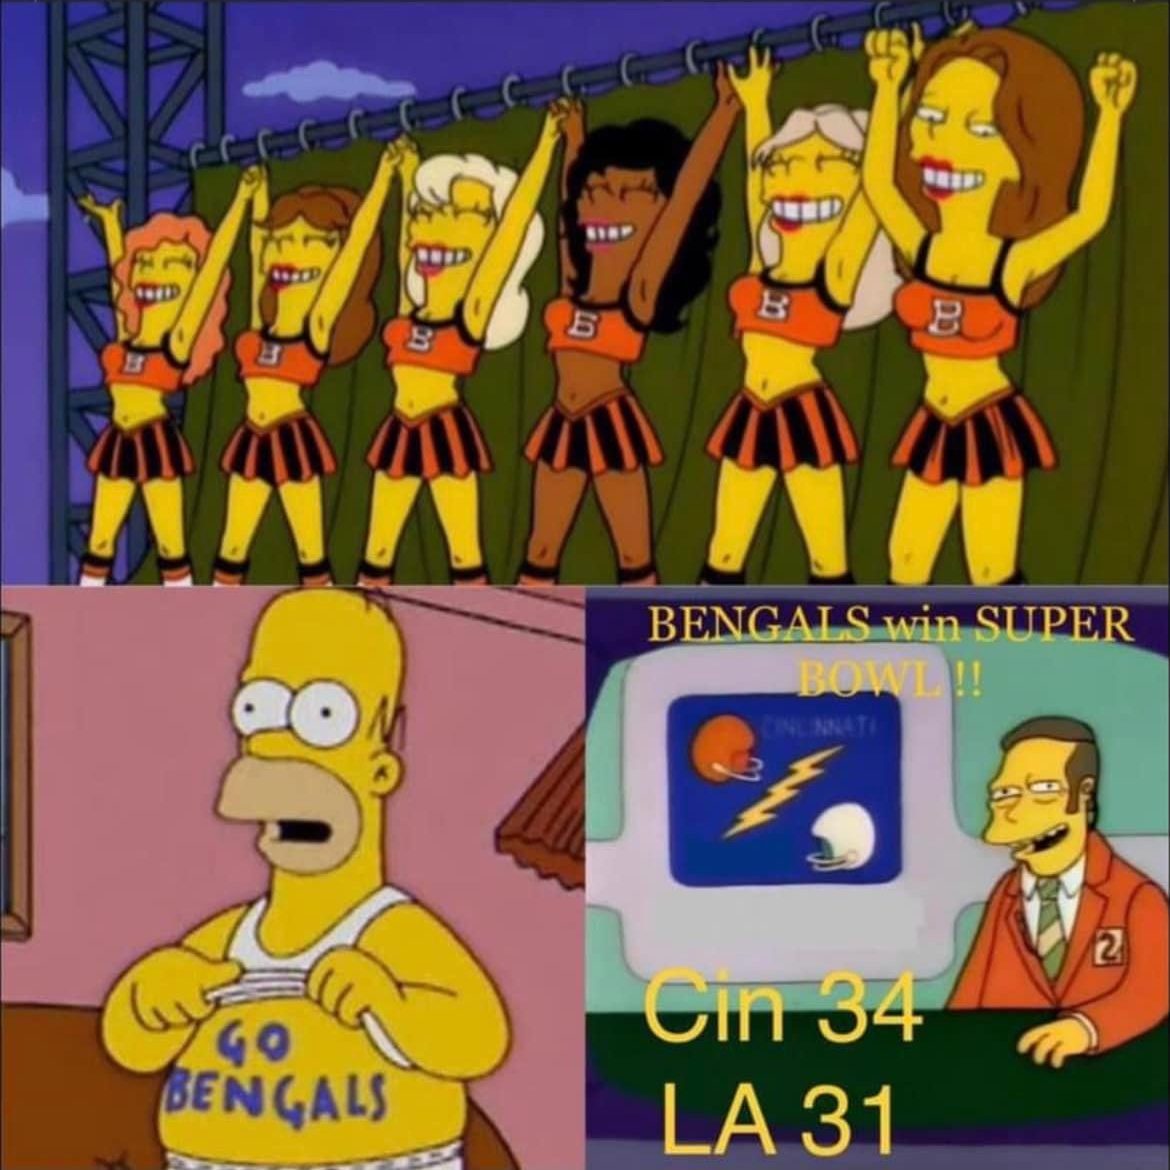 Simpsons predict the Rams winning the Super Bowl 